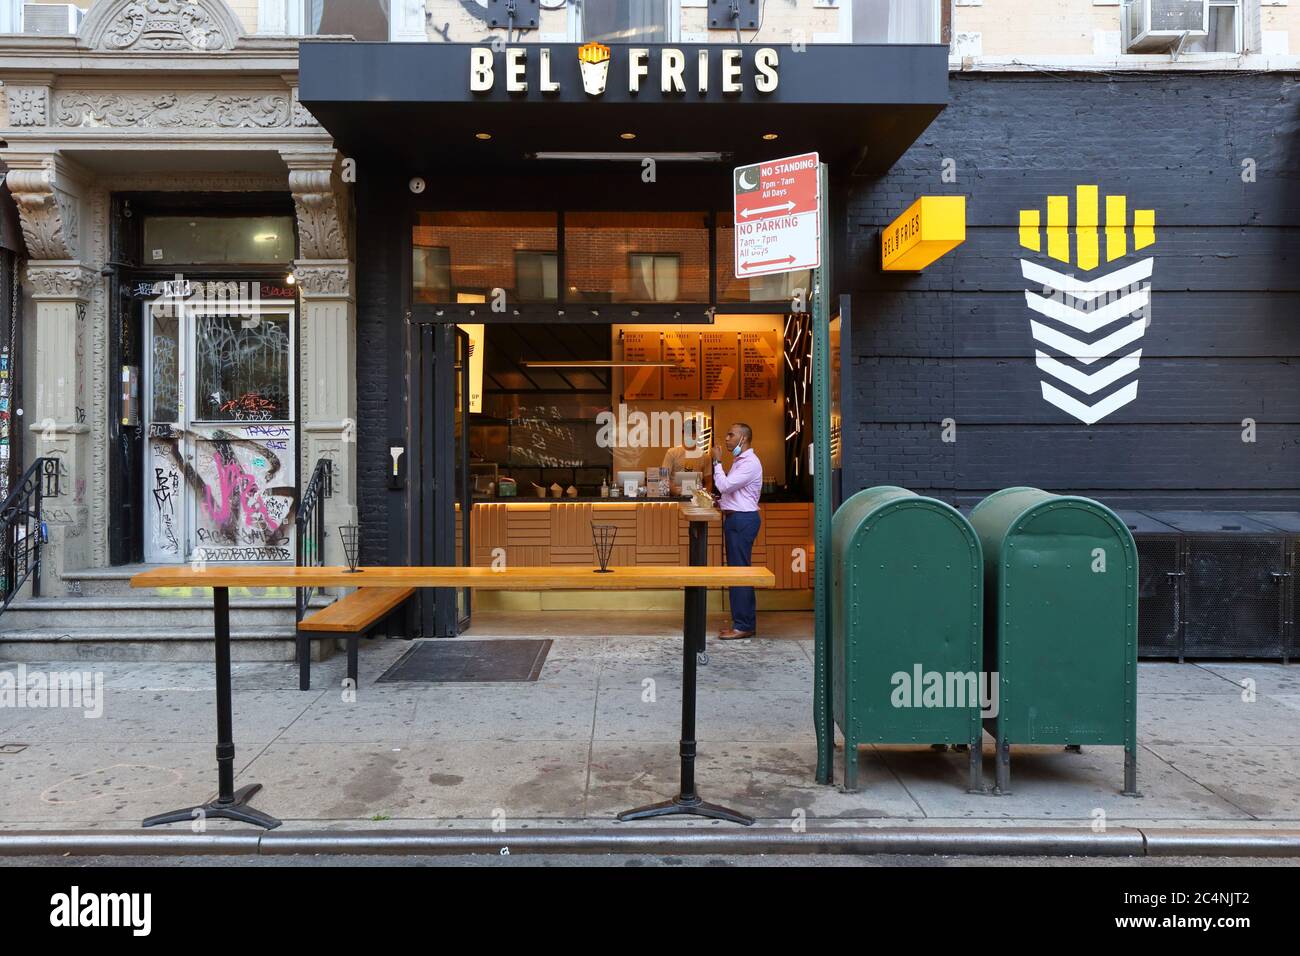 Bel-Fries, 132 Ludlow Street, New York, NY. exterior storefront of a Belgian fries shop in the Lower East Side neighborhood of Manhattan. Stock Photo